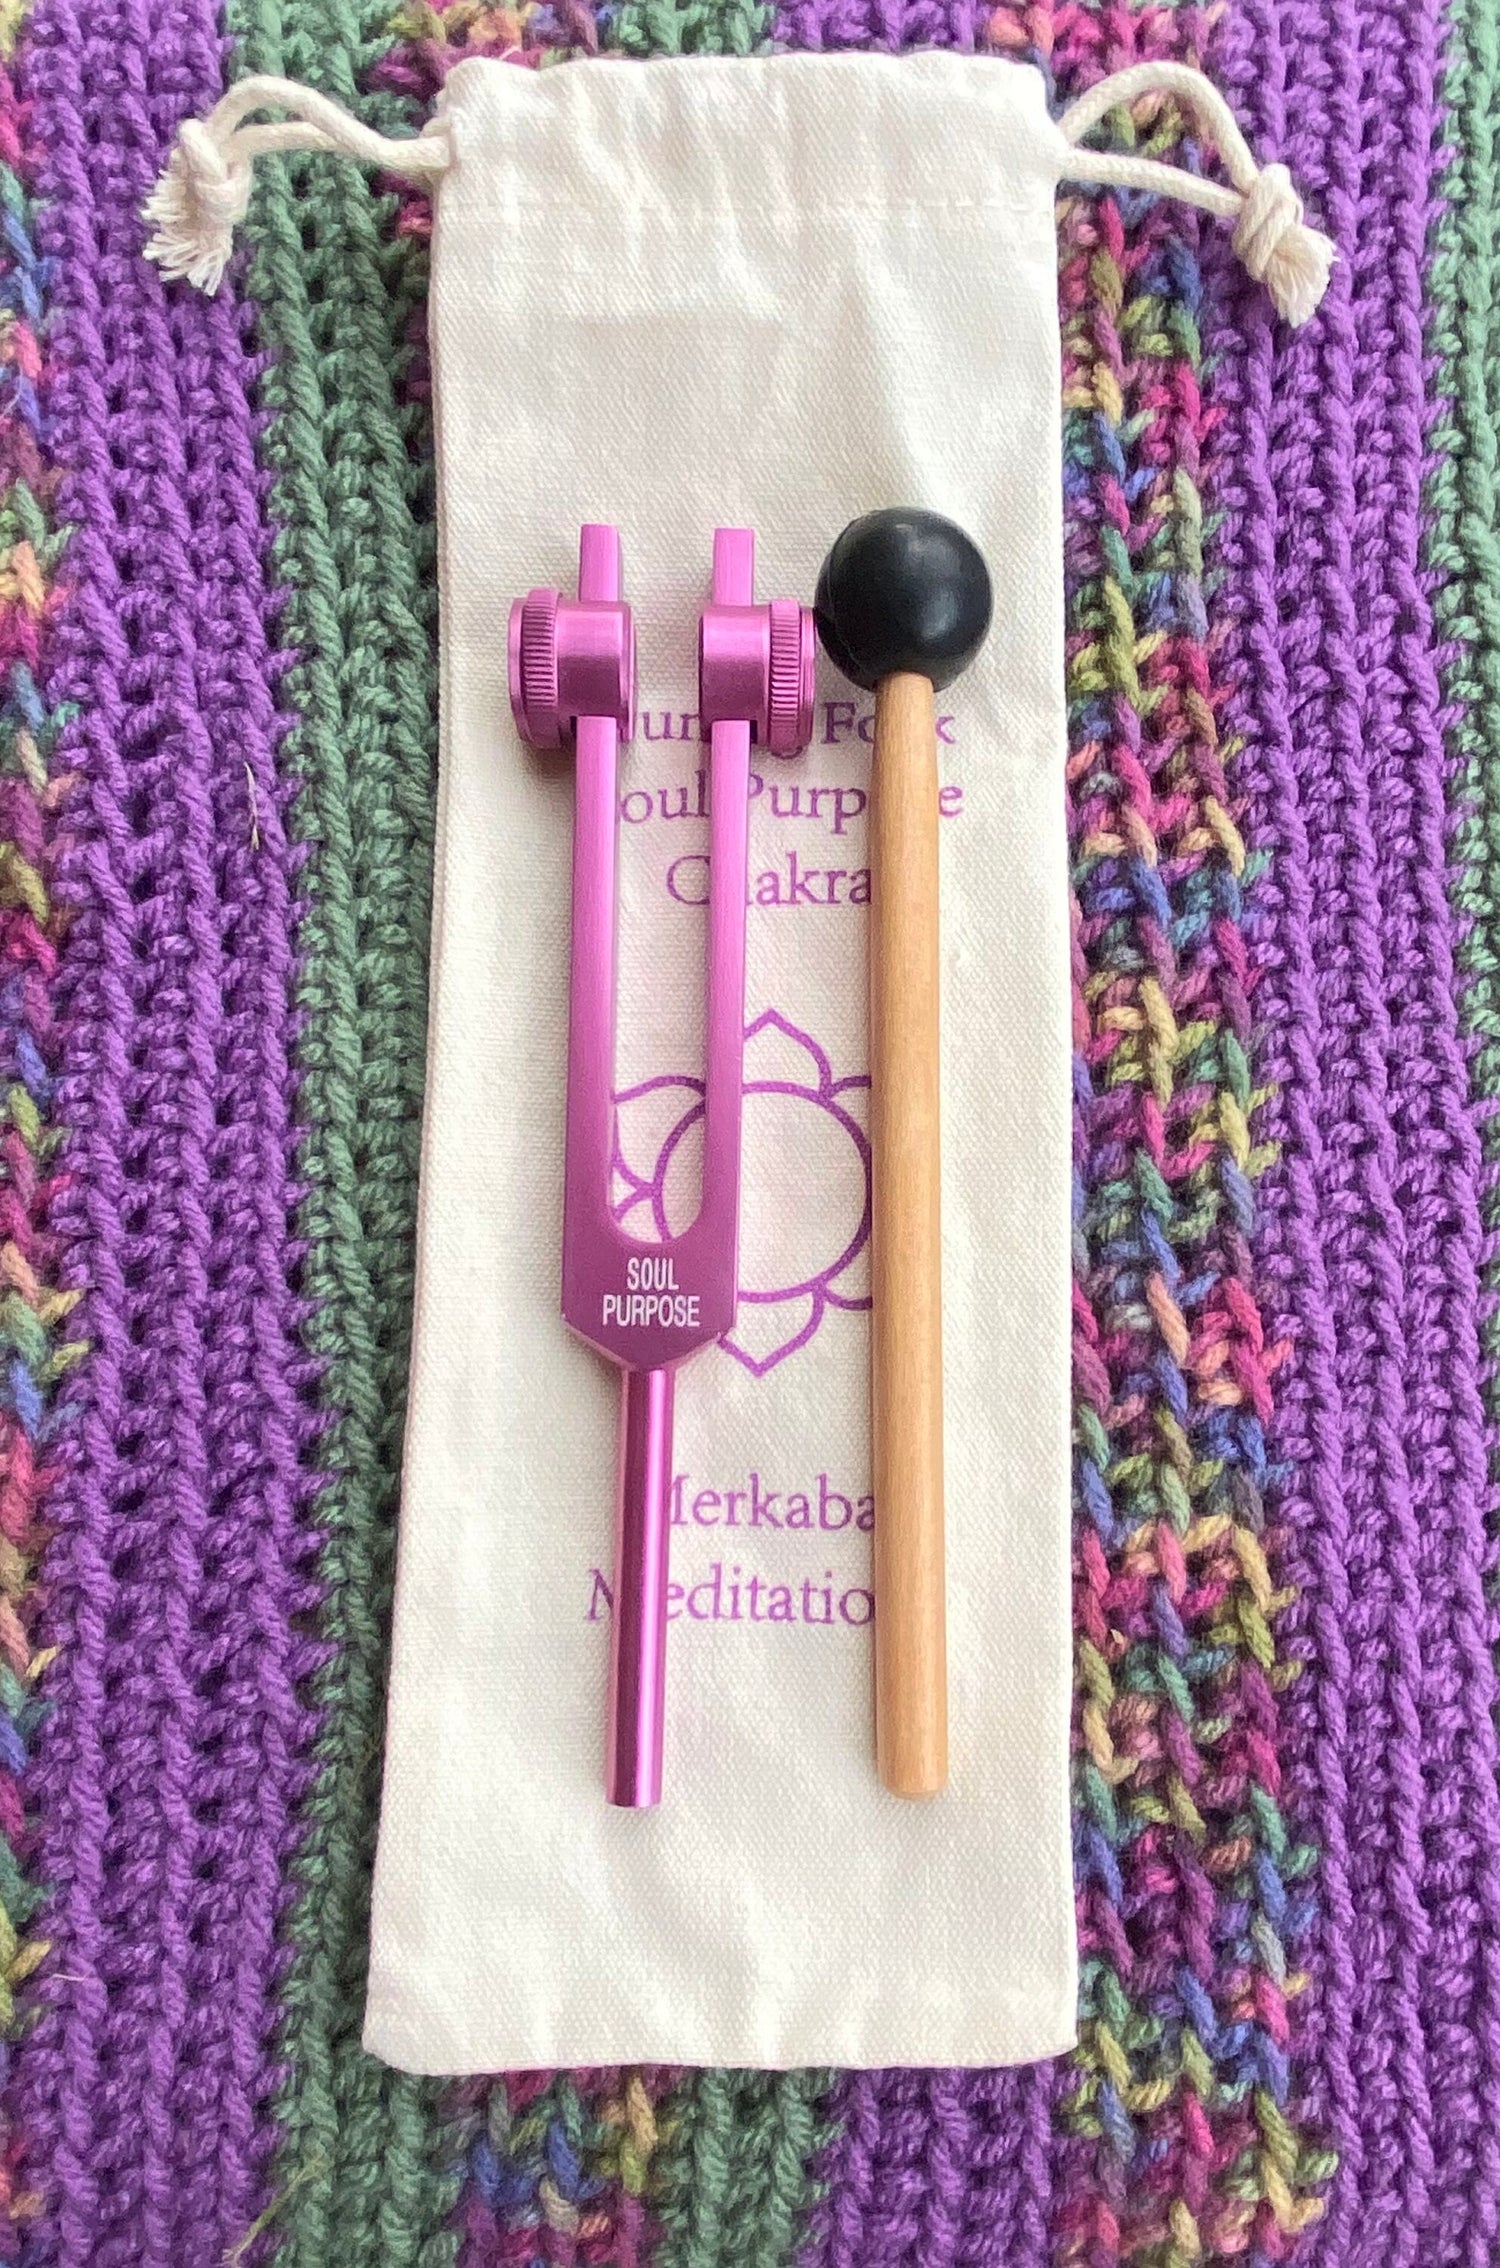 Heart Chakra and Merkaba Soul Purpose Tuning Fork Bundle - Perfect Pitch - Morganite Gemstone Infused, F-Note, Carry Bag, Gift For Her